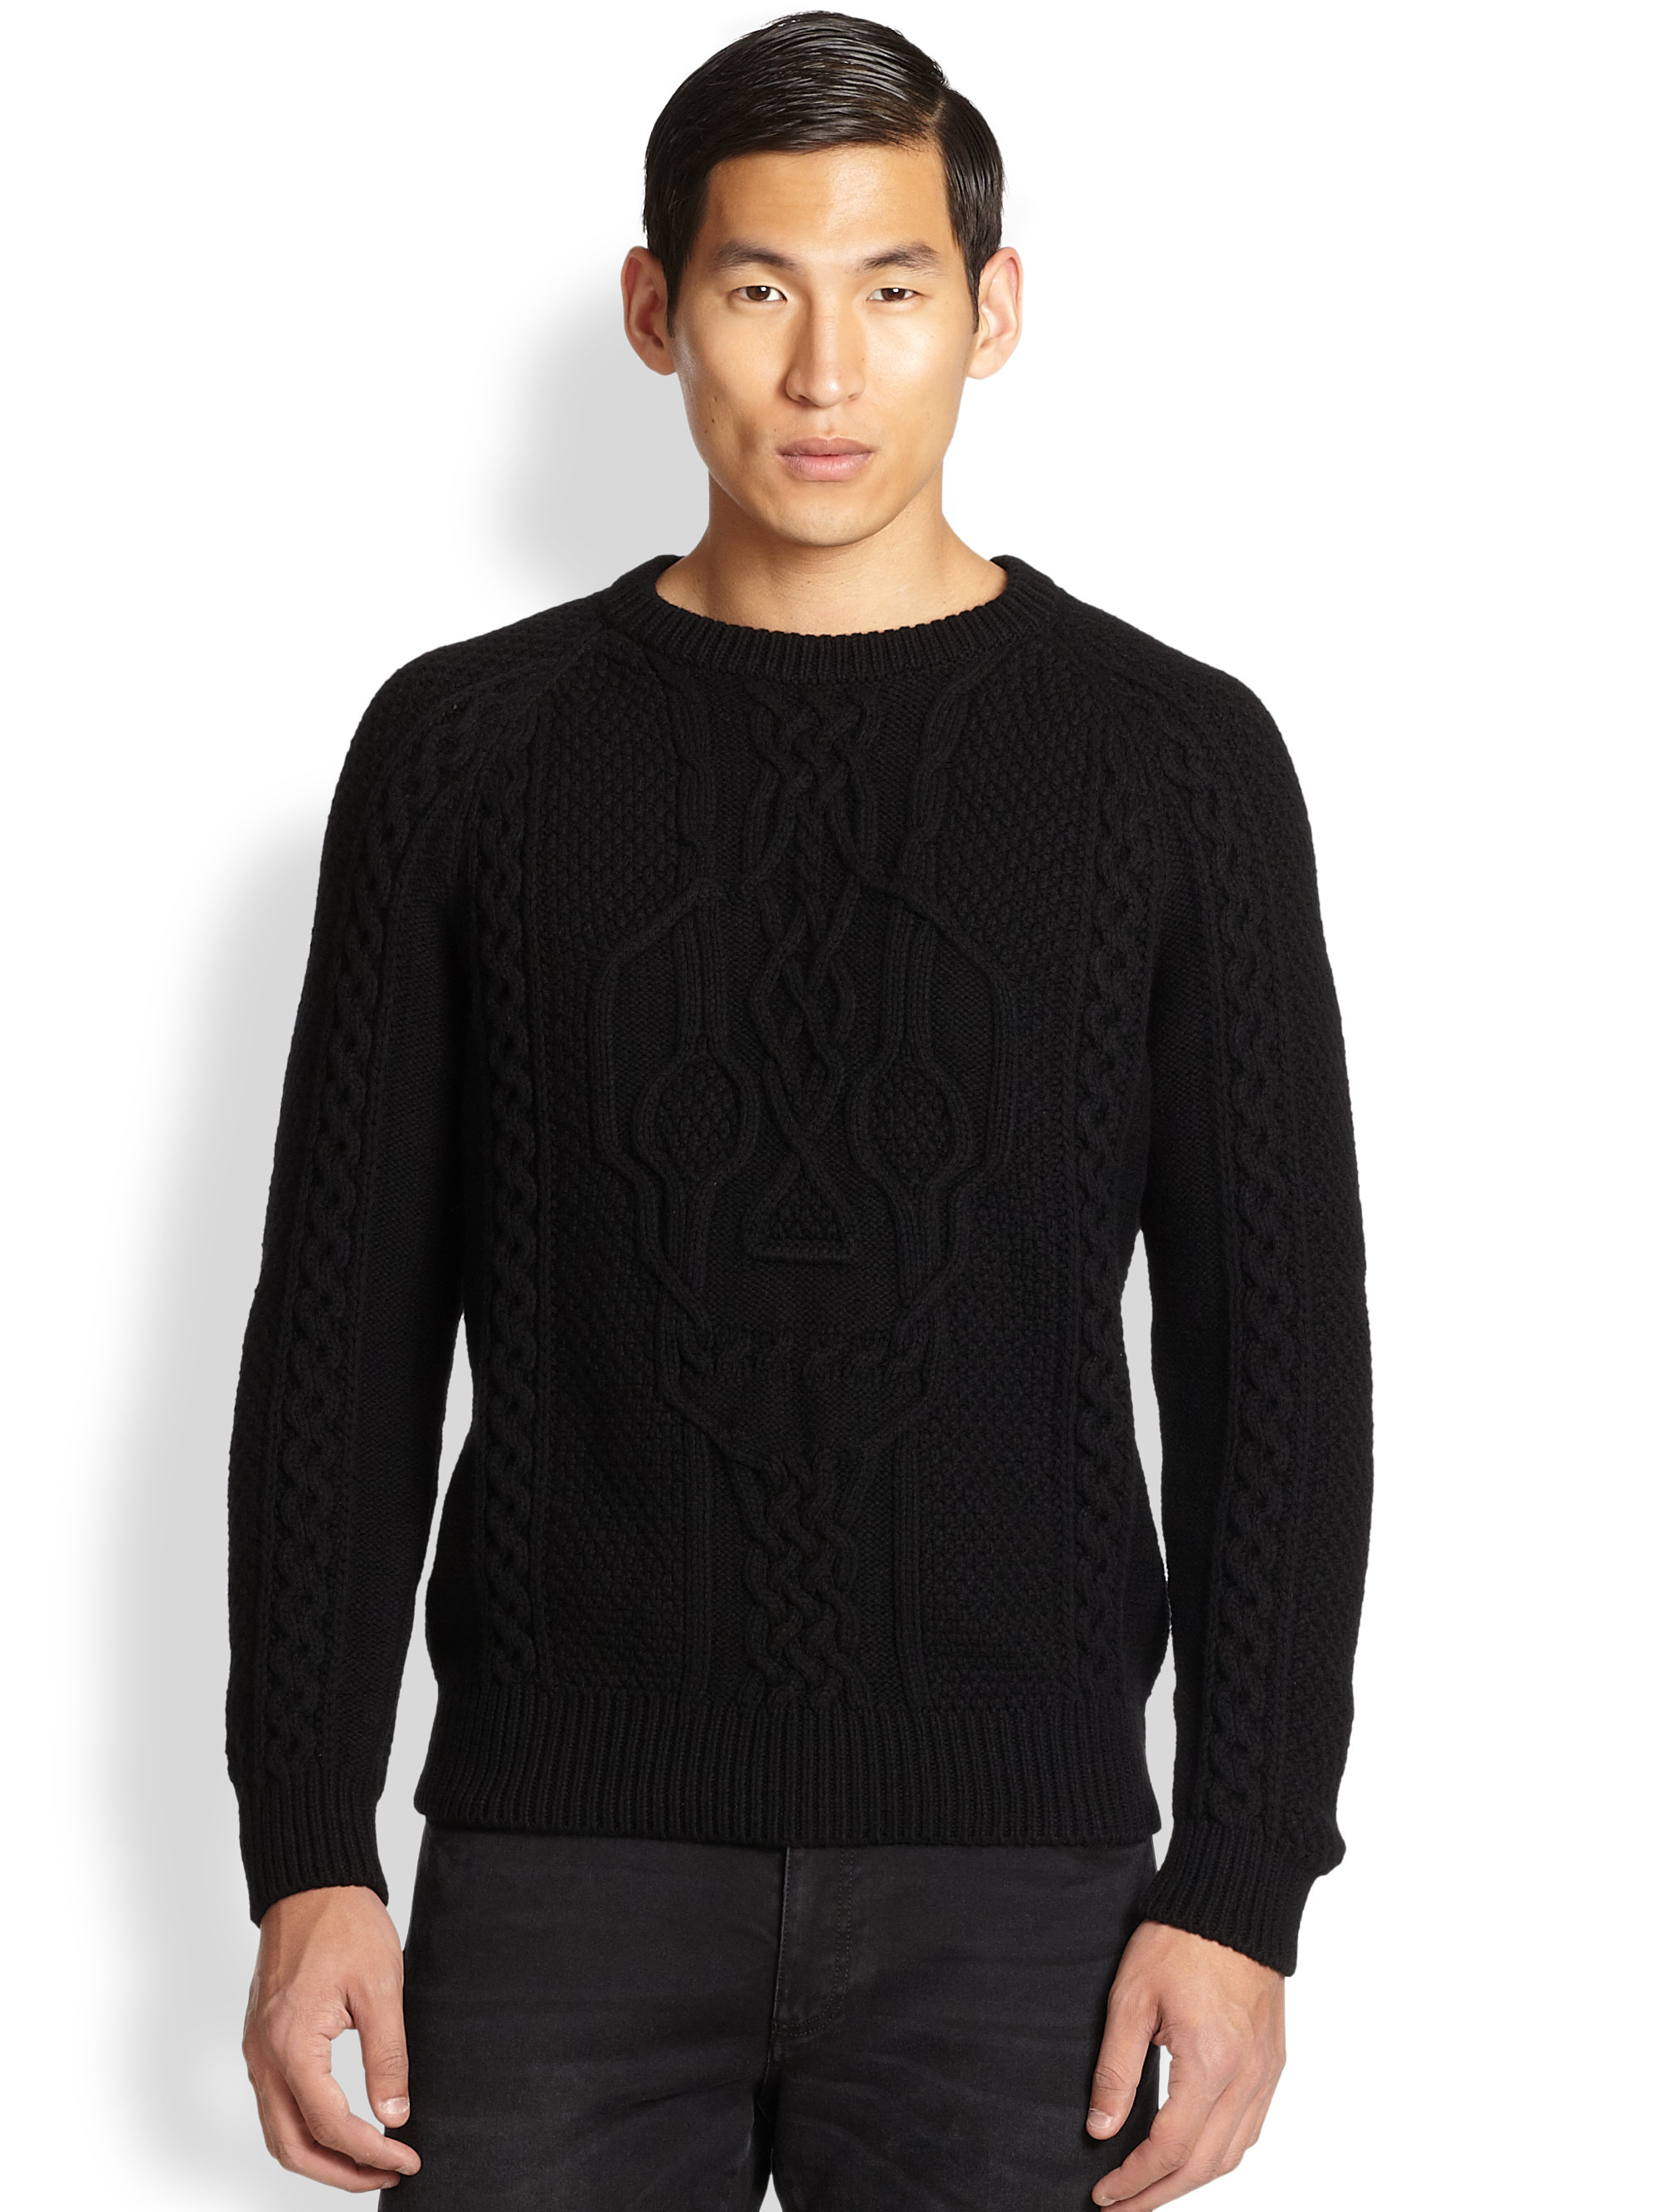 Lyst - Alexander Mcqueen Skull Cable Knit Sweater in Black for Men